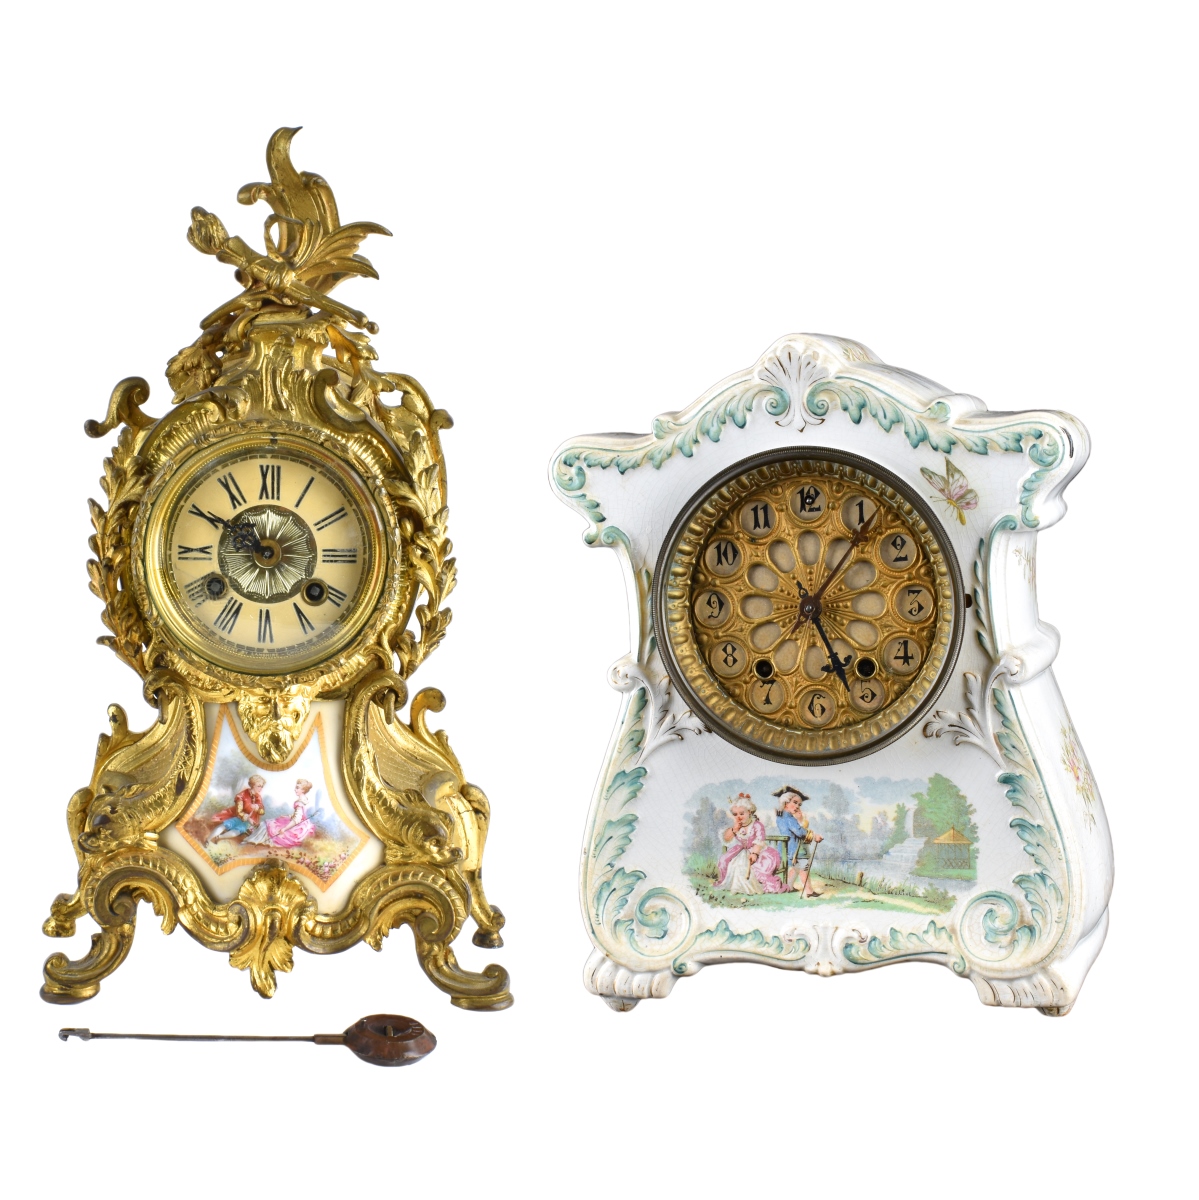 Grouping of Two (2) Antique Clocks